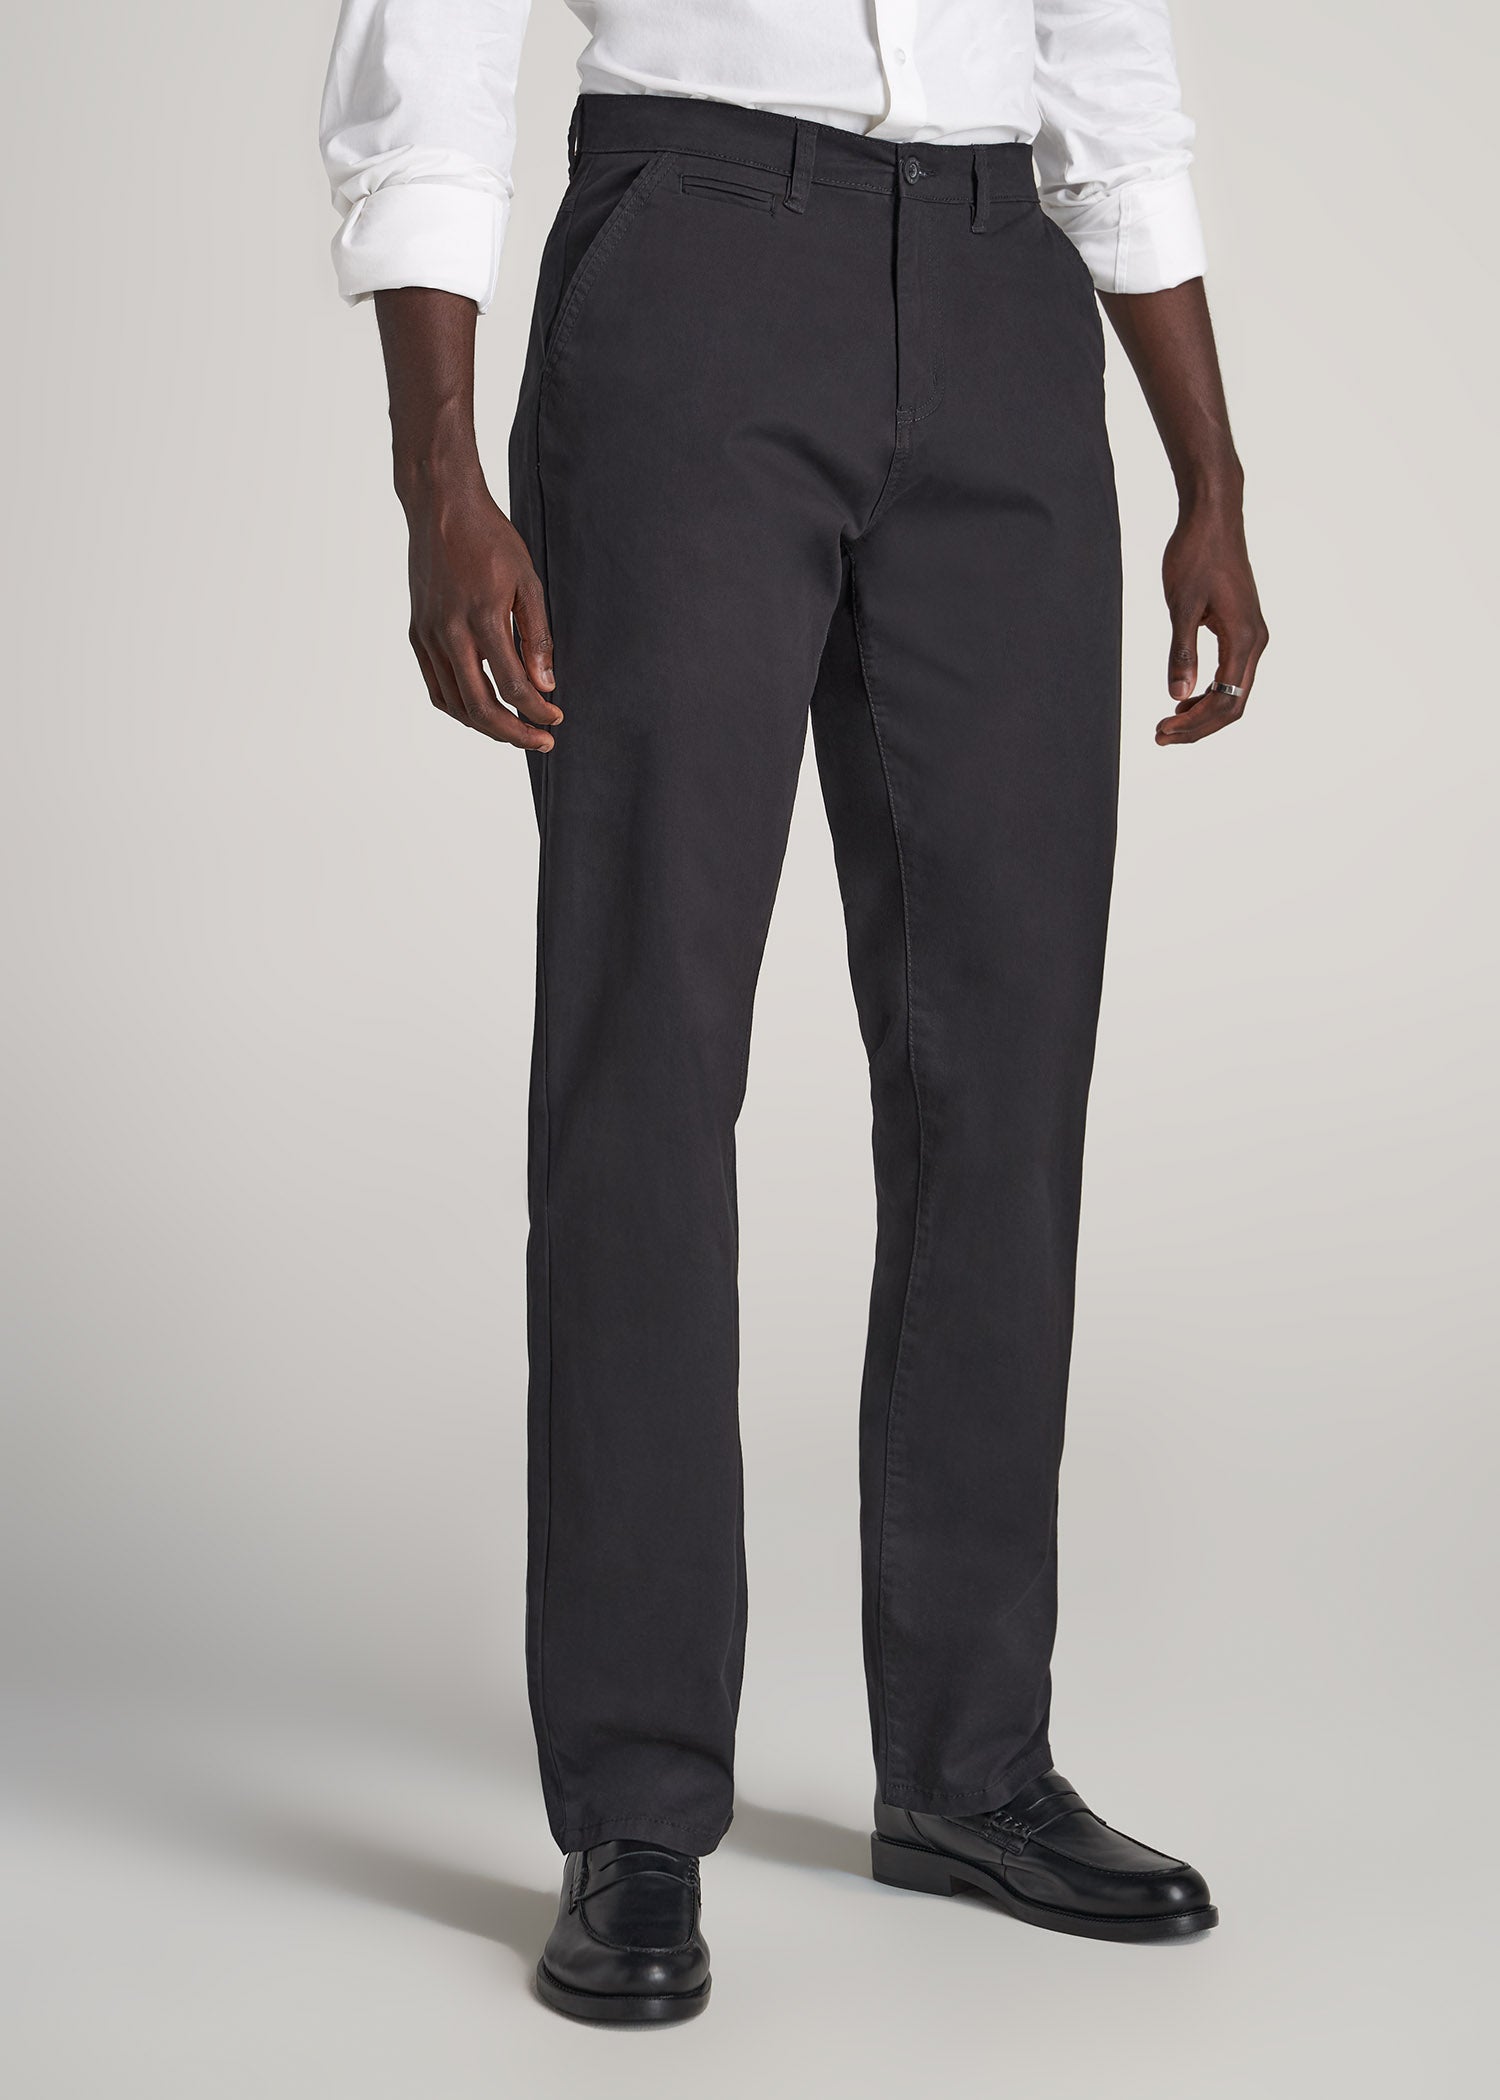 Mason SEMI-RELAXED Chinos in Black - Pants for Tall Men